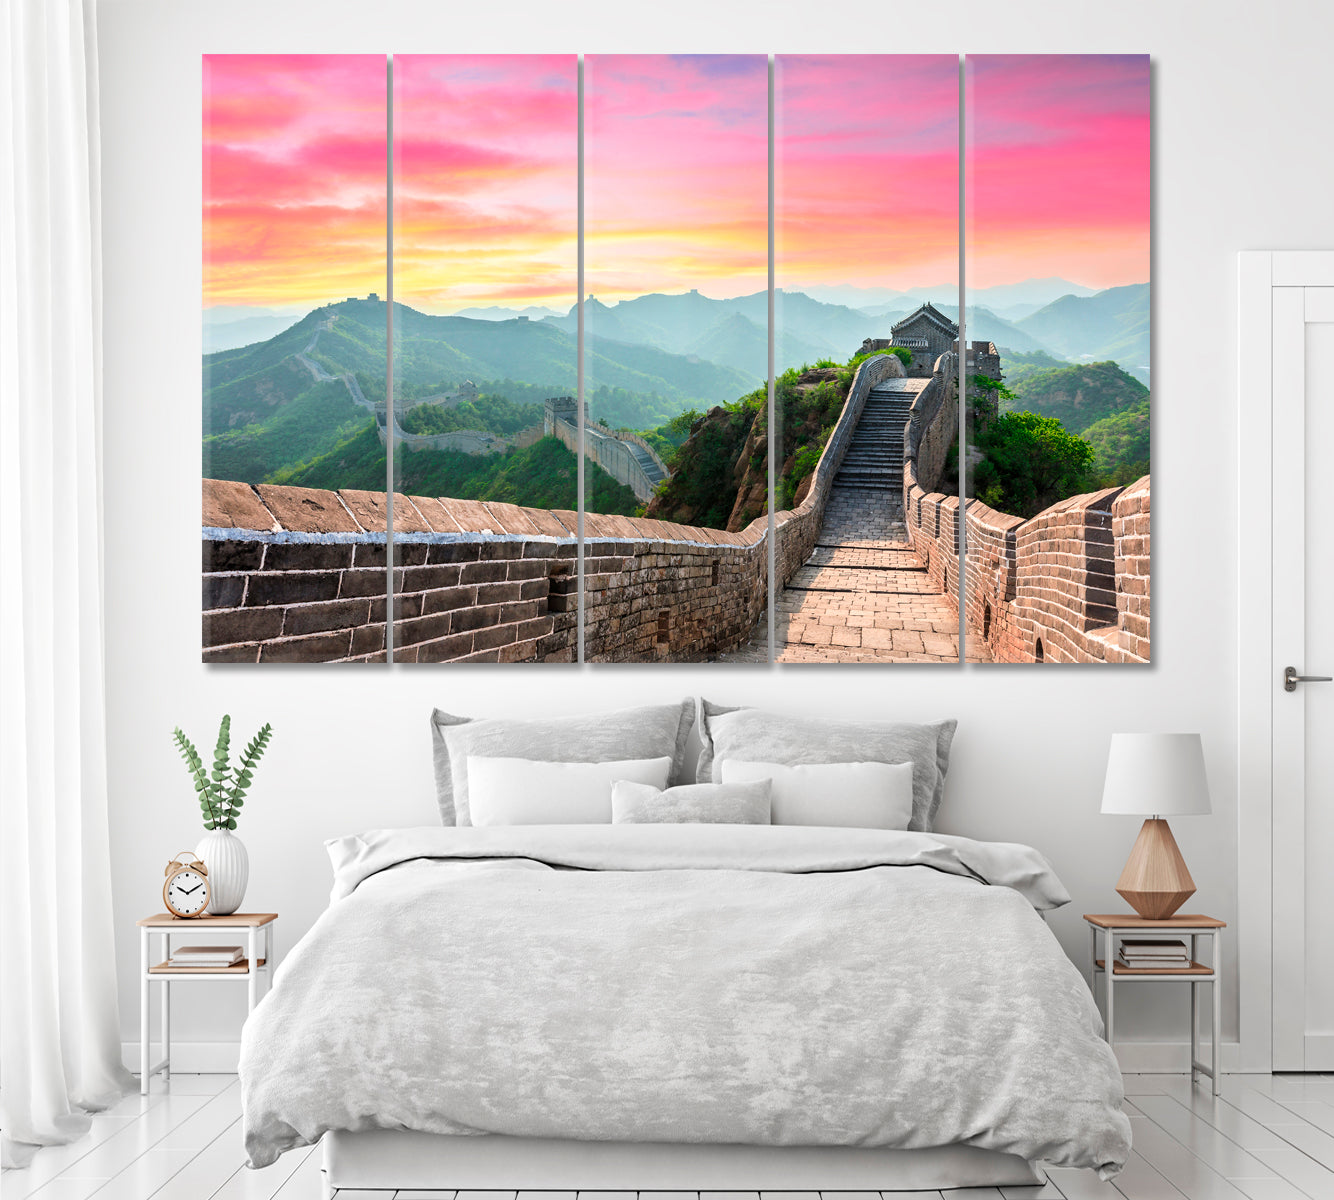 Great Wall of China Canvas Print ArtLexy 5 Panels 36"x24" inches 